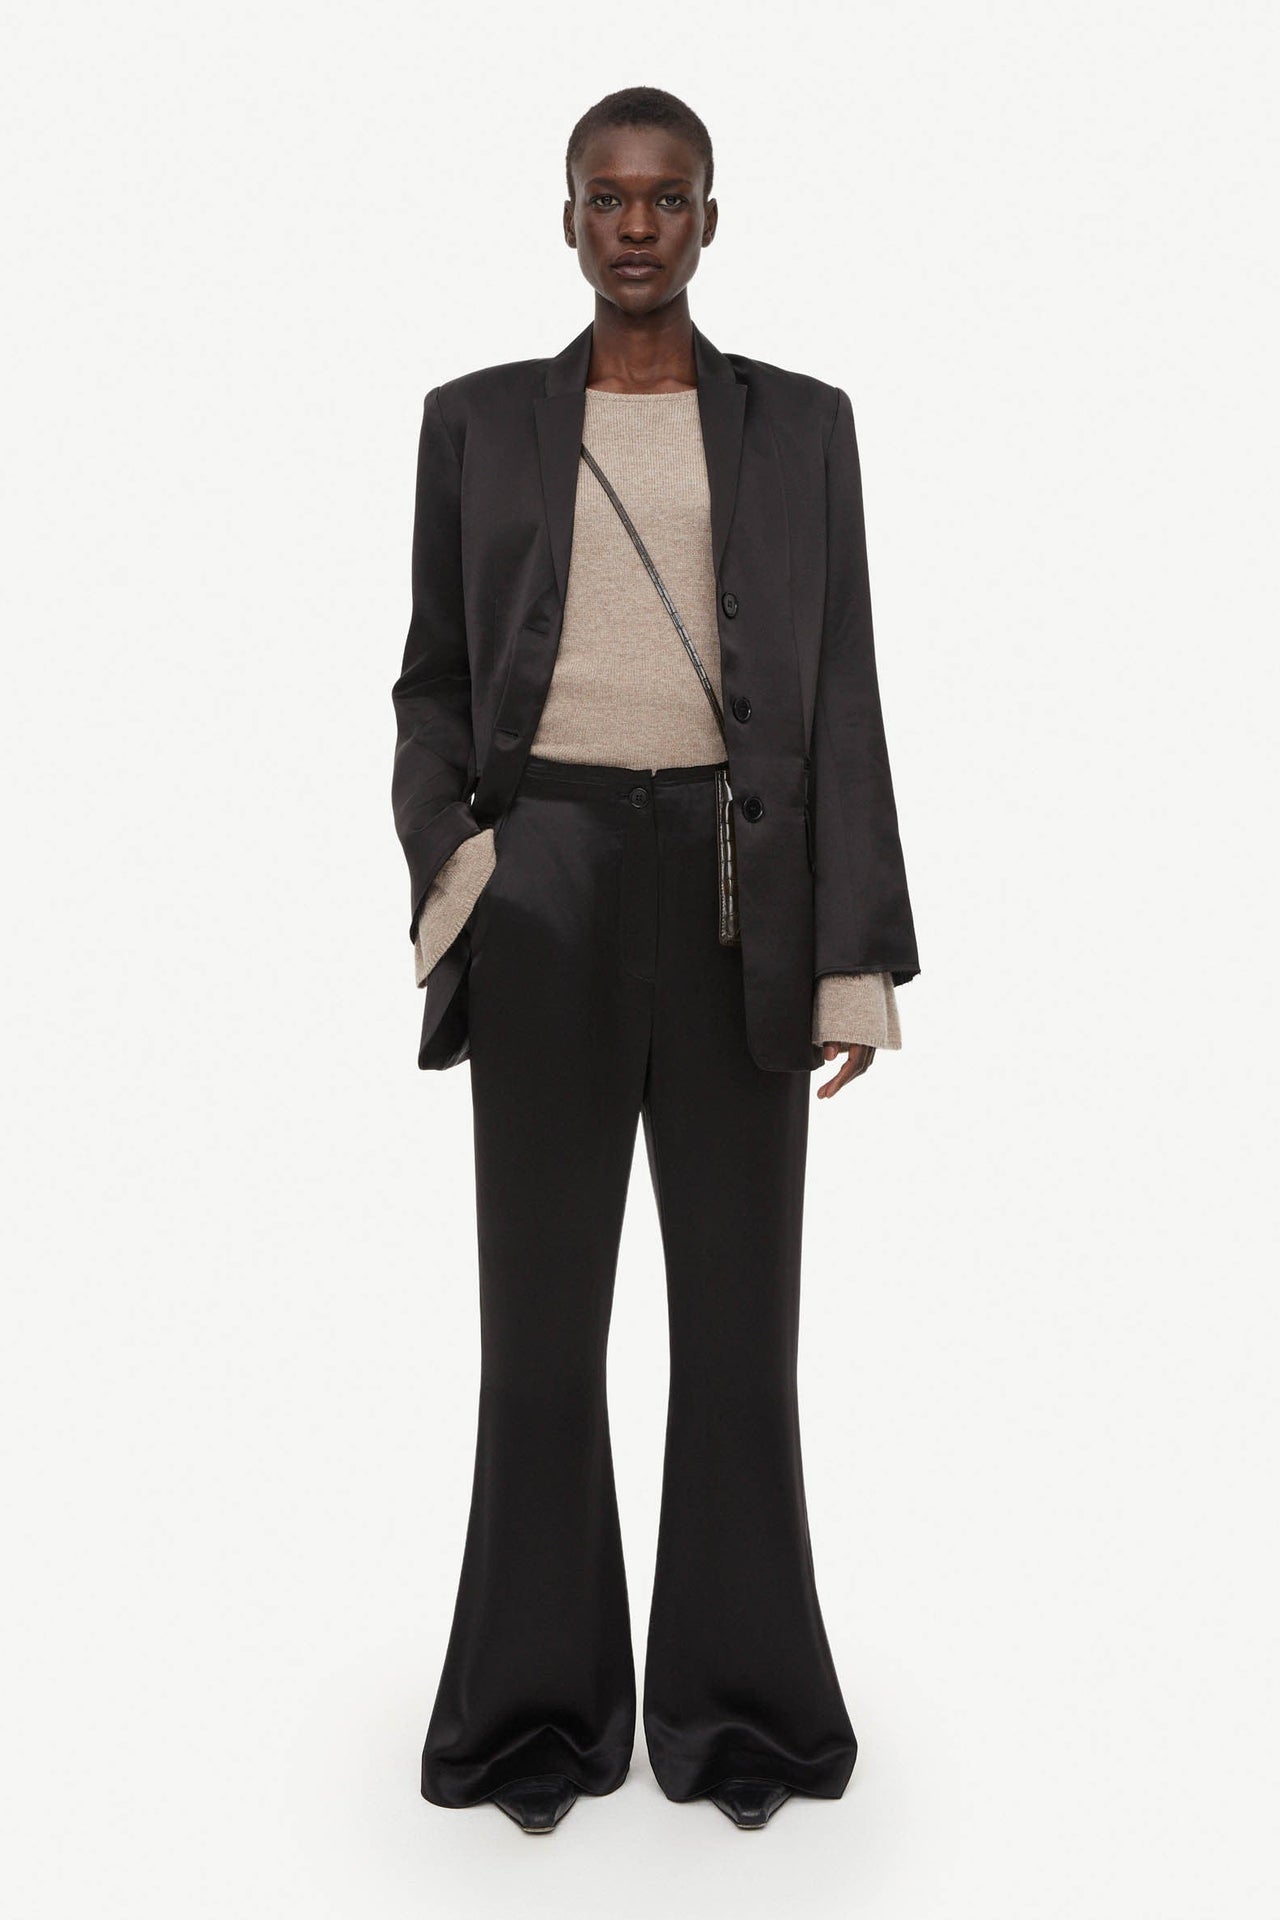 AMORES PANT-Pant-By Malene Birger-Debs Boutique